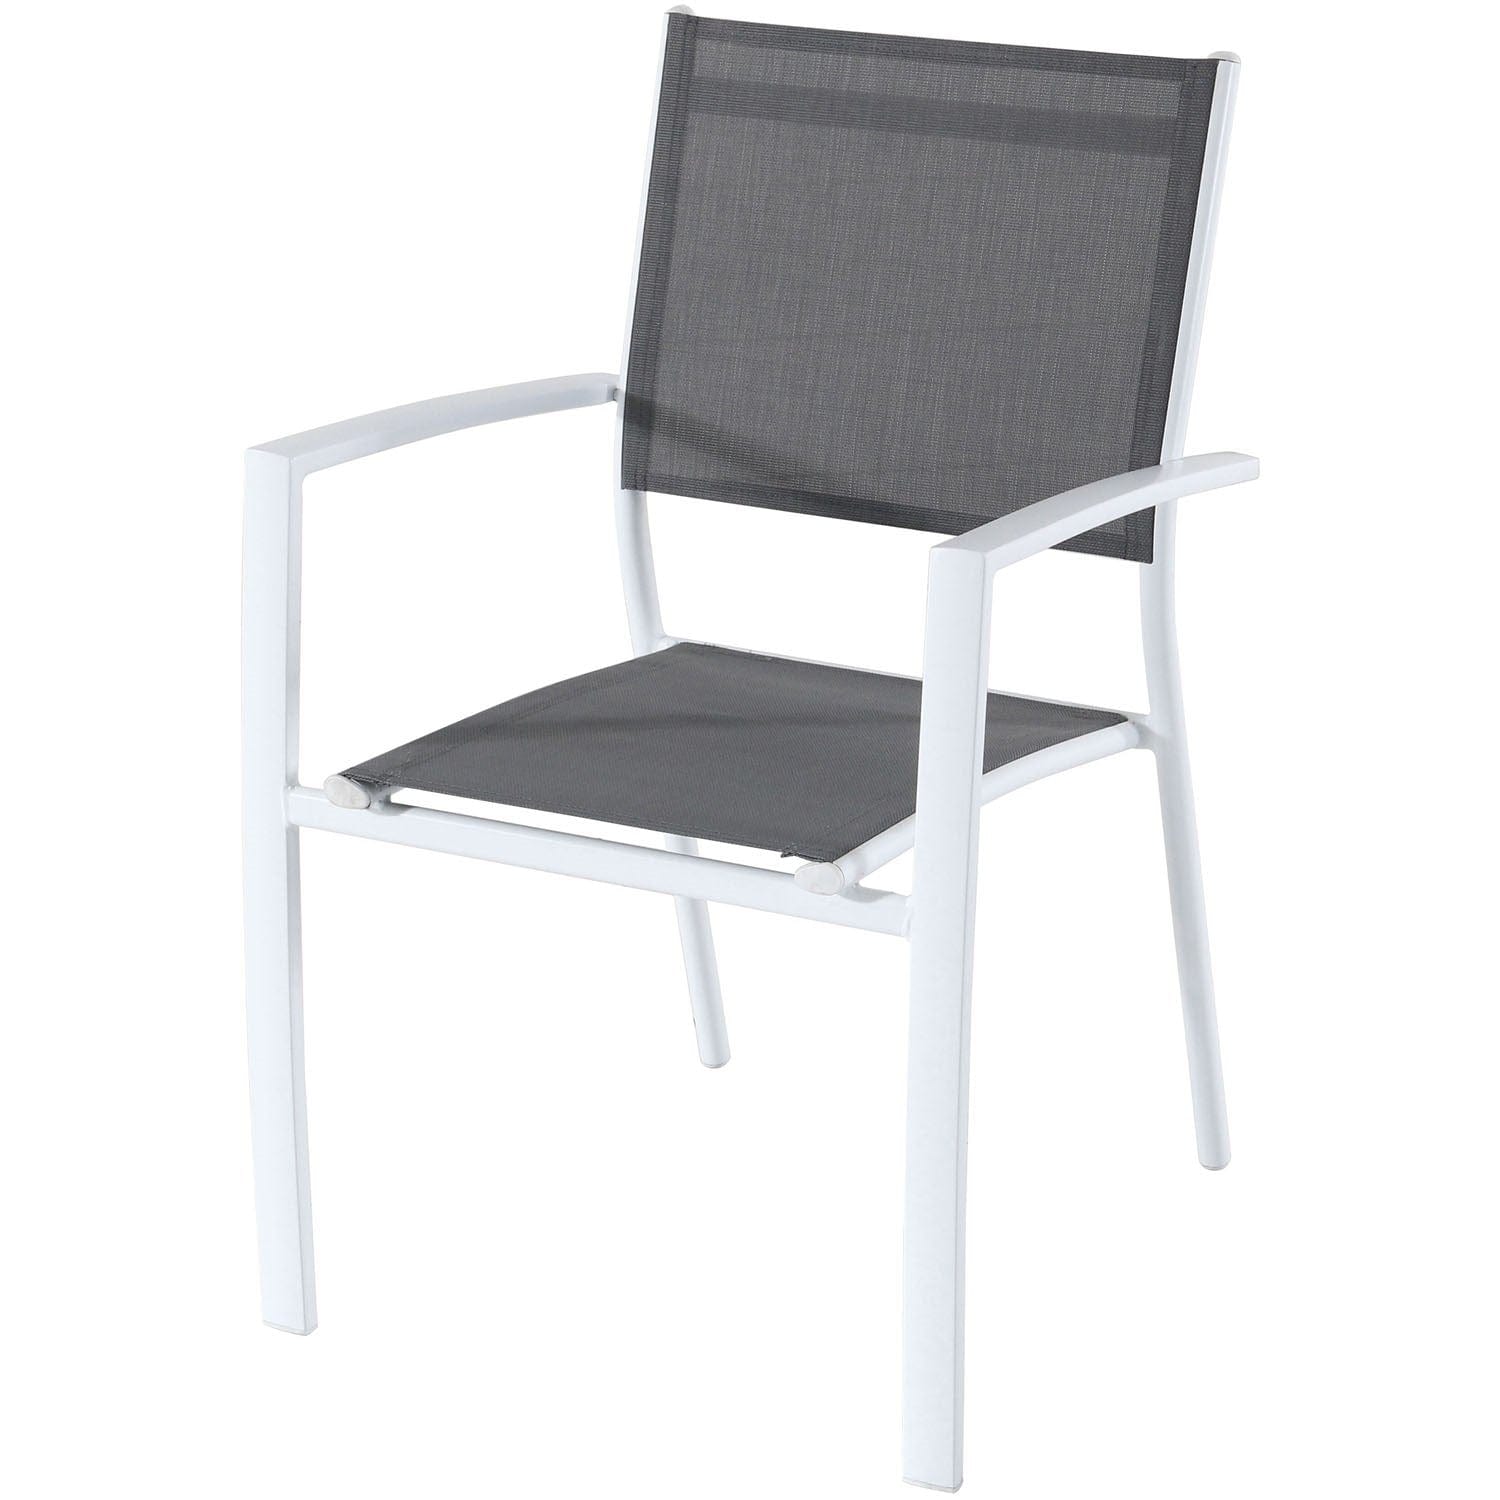 Hanover Outdoor Dining Set Hanover - Naples5pc: 4 Aluminum Sling Back Chairs, 38" Sq Slat Top Table